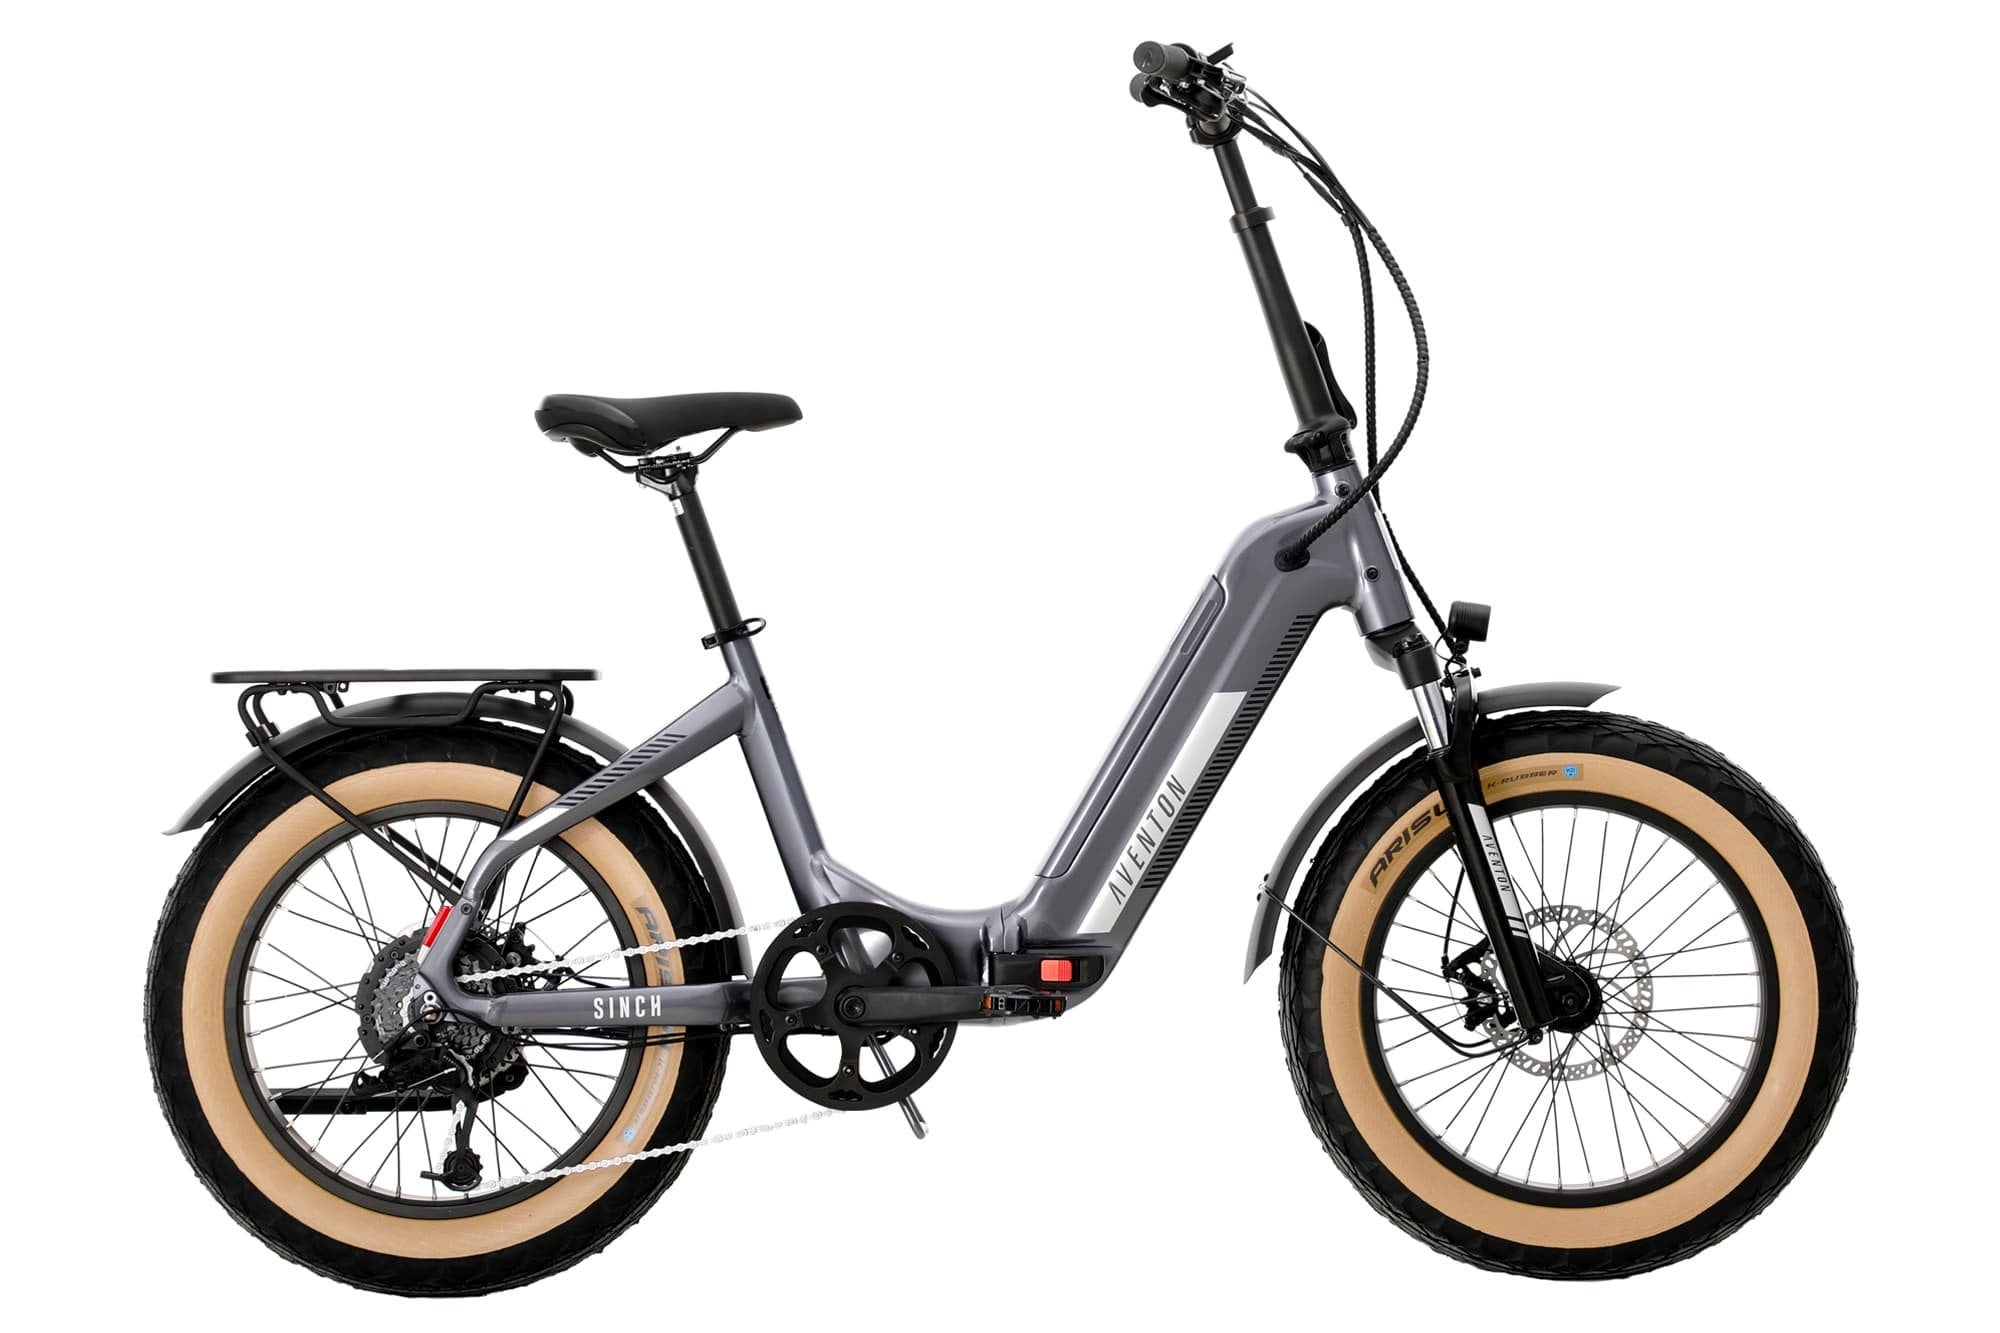 Looking for a Casual Folding eBike under $1700